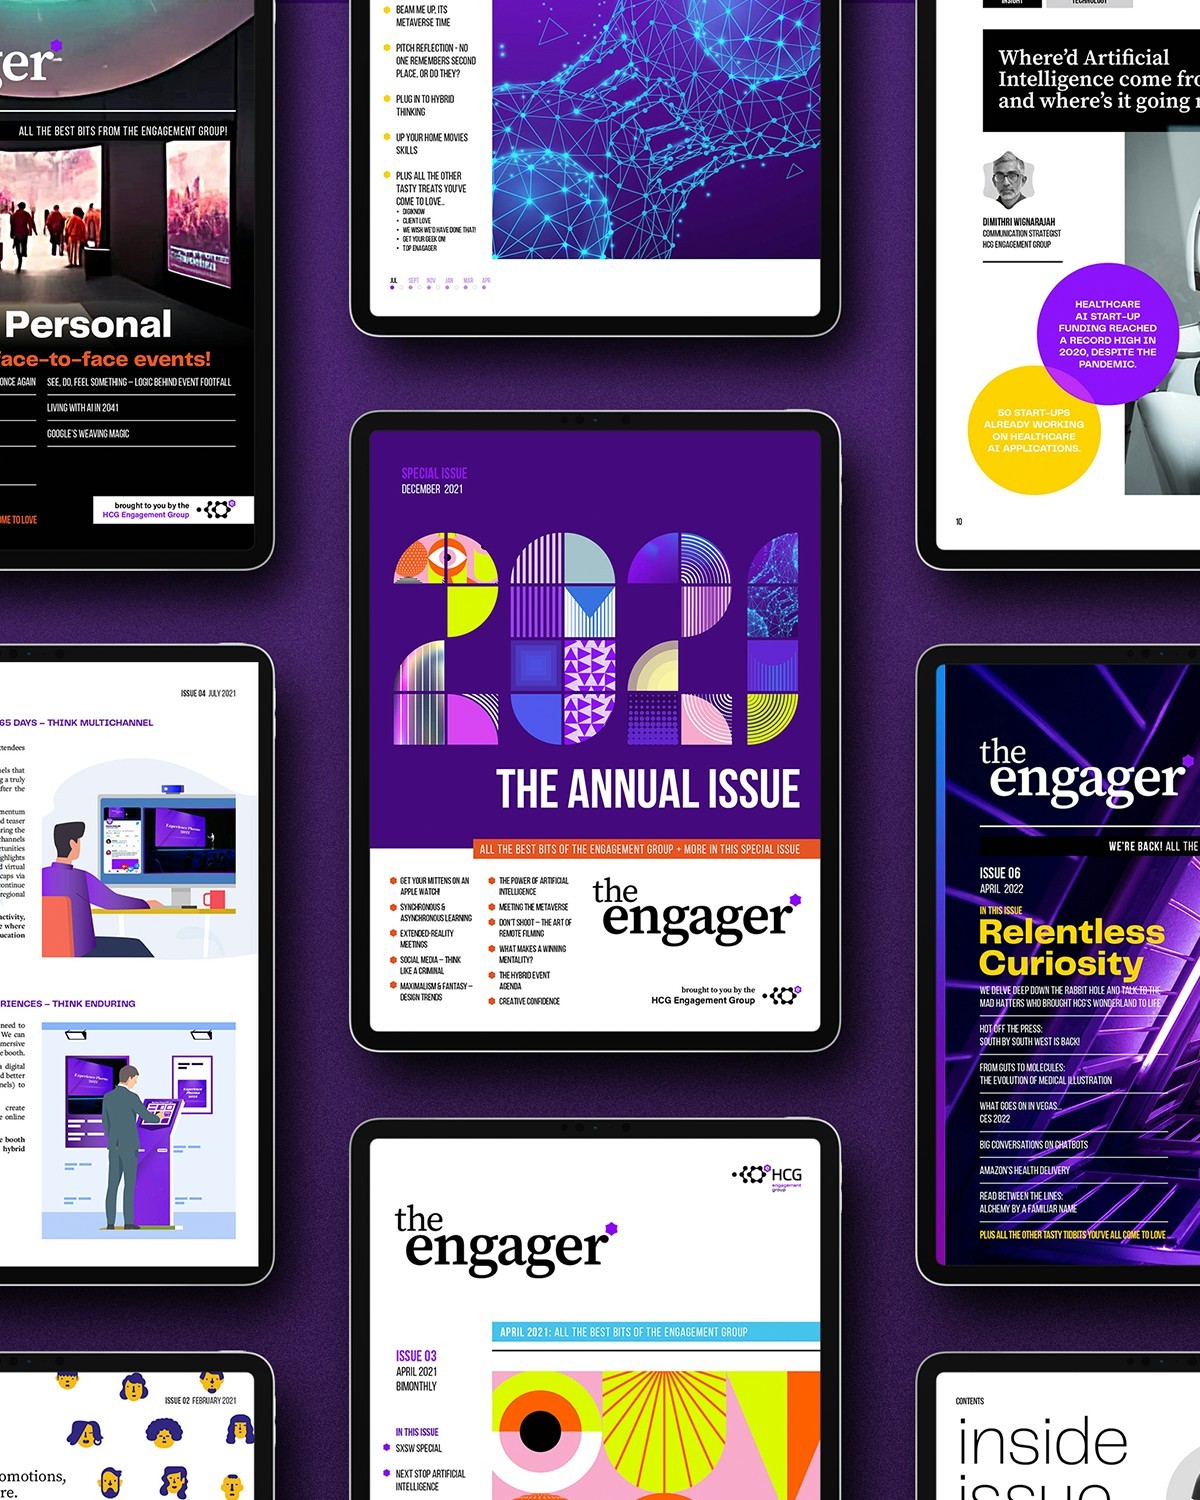 The Engager is an interactive newsletter distributed both internally to our employees, and externally to our clients.